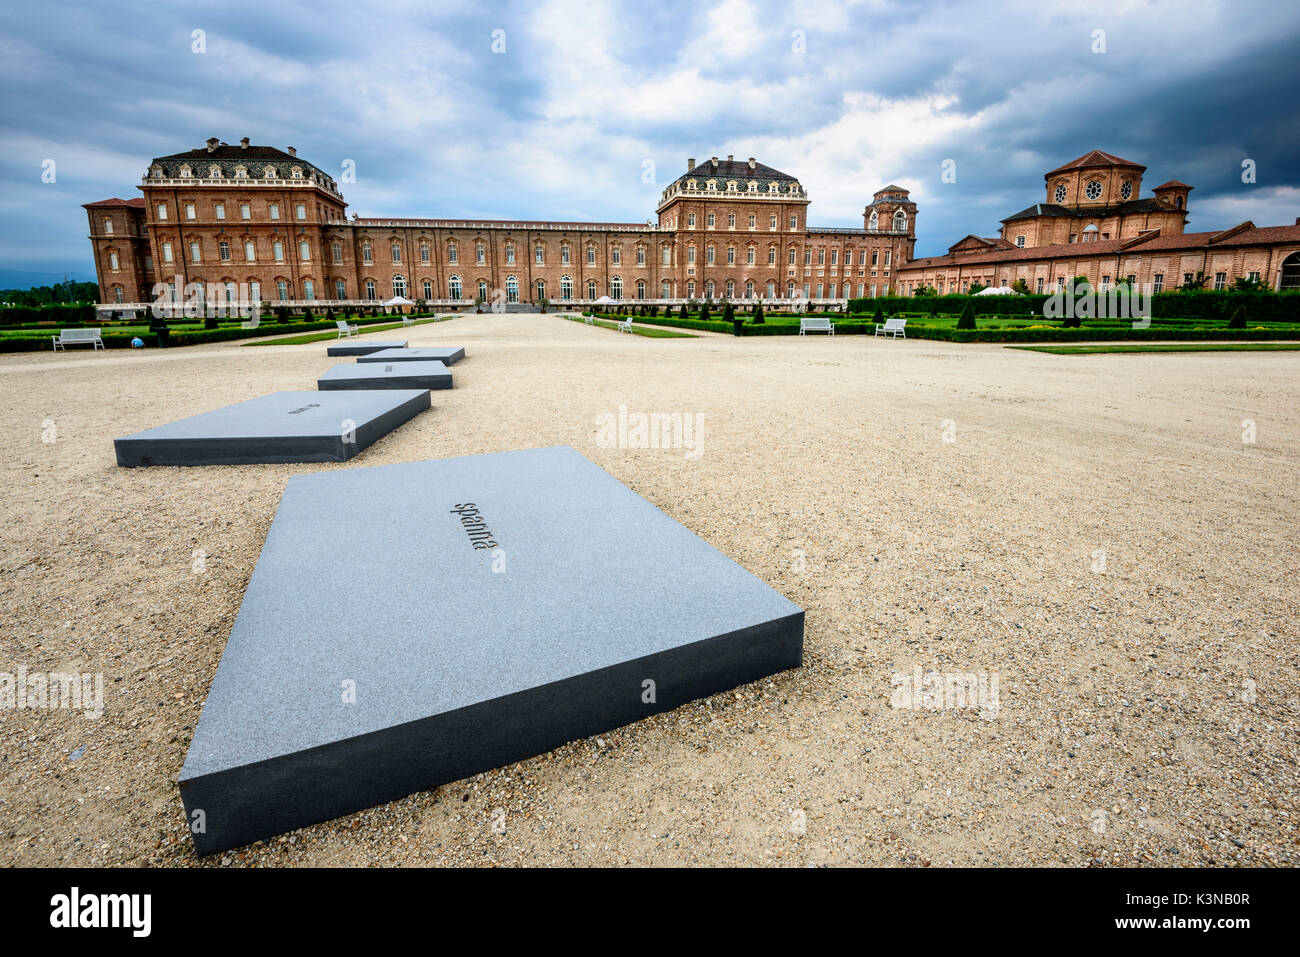 Palace of Venaria, Residences of the Royal House of Savoy. Europe.  Italy. Piedmont. Torino district. Venaria Reale Stock Photo